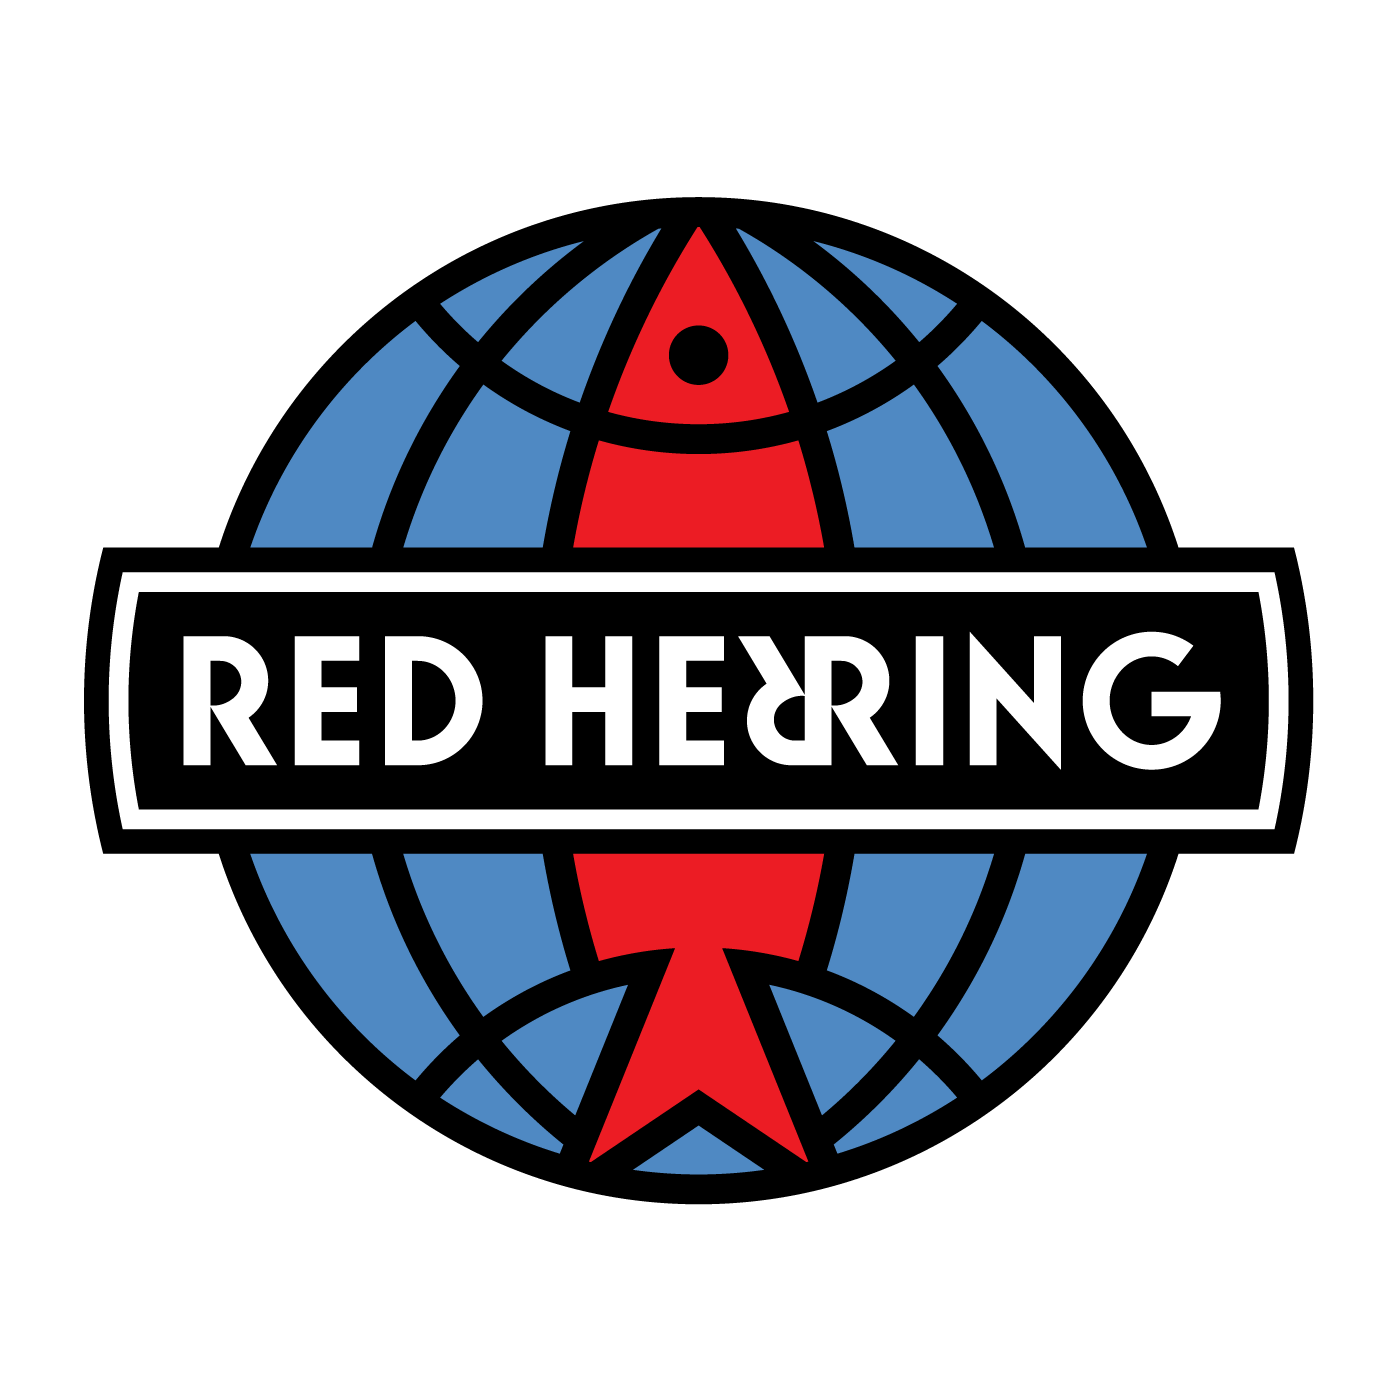 Restaurant with Red Circle Logo - Red Herring Restaurant logo (1995) - Fonts In Use